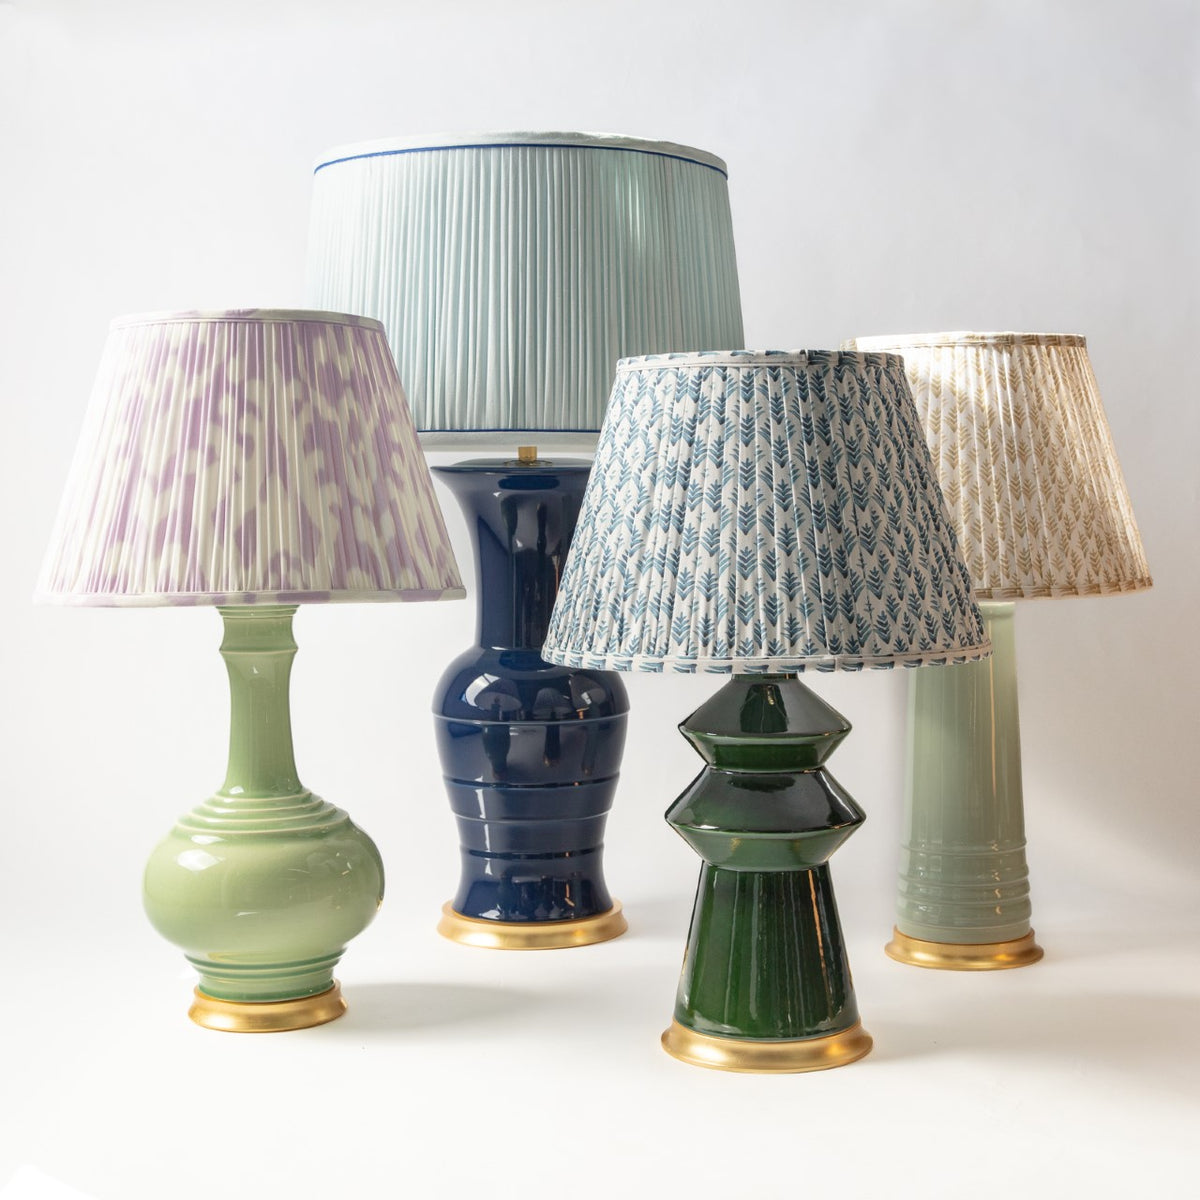 4 lamps with lampshades